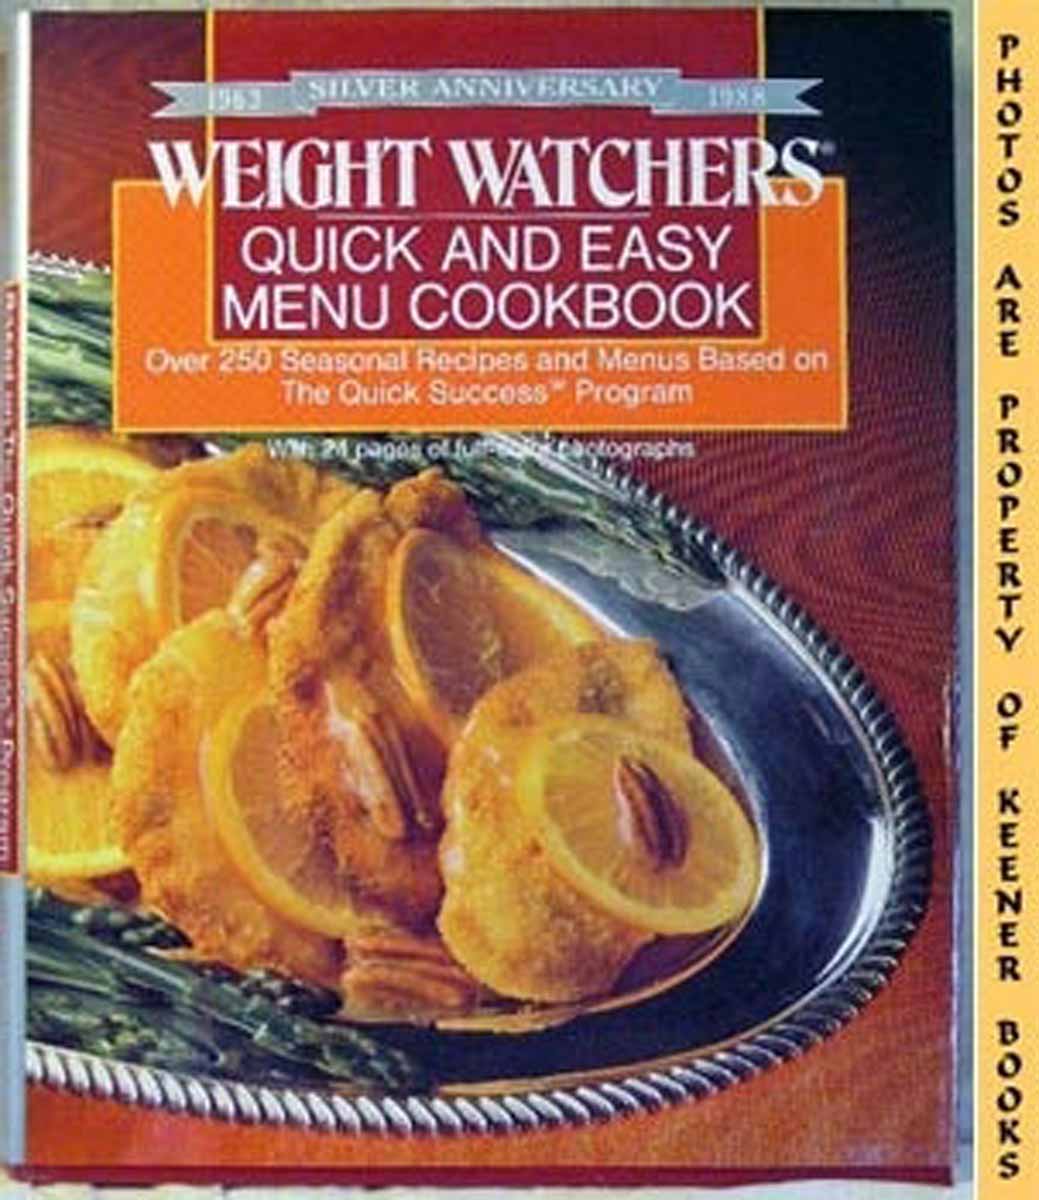 NIDETCH, JEAN - Weight Watchers Quick and Easy Menu Cookbook : Over 250 Seasonal Recipes and Menus Based on the Quick Success Program